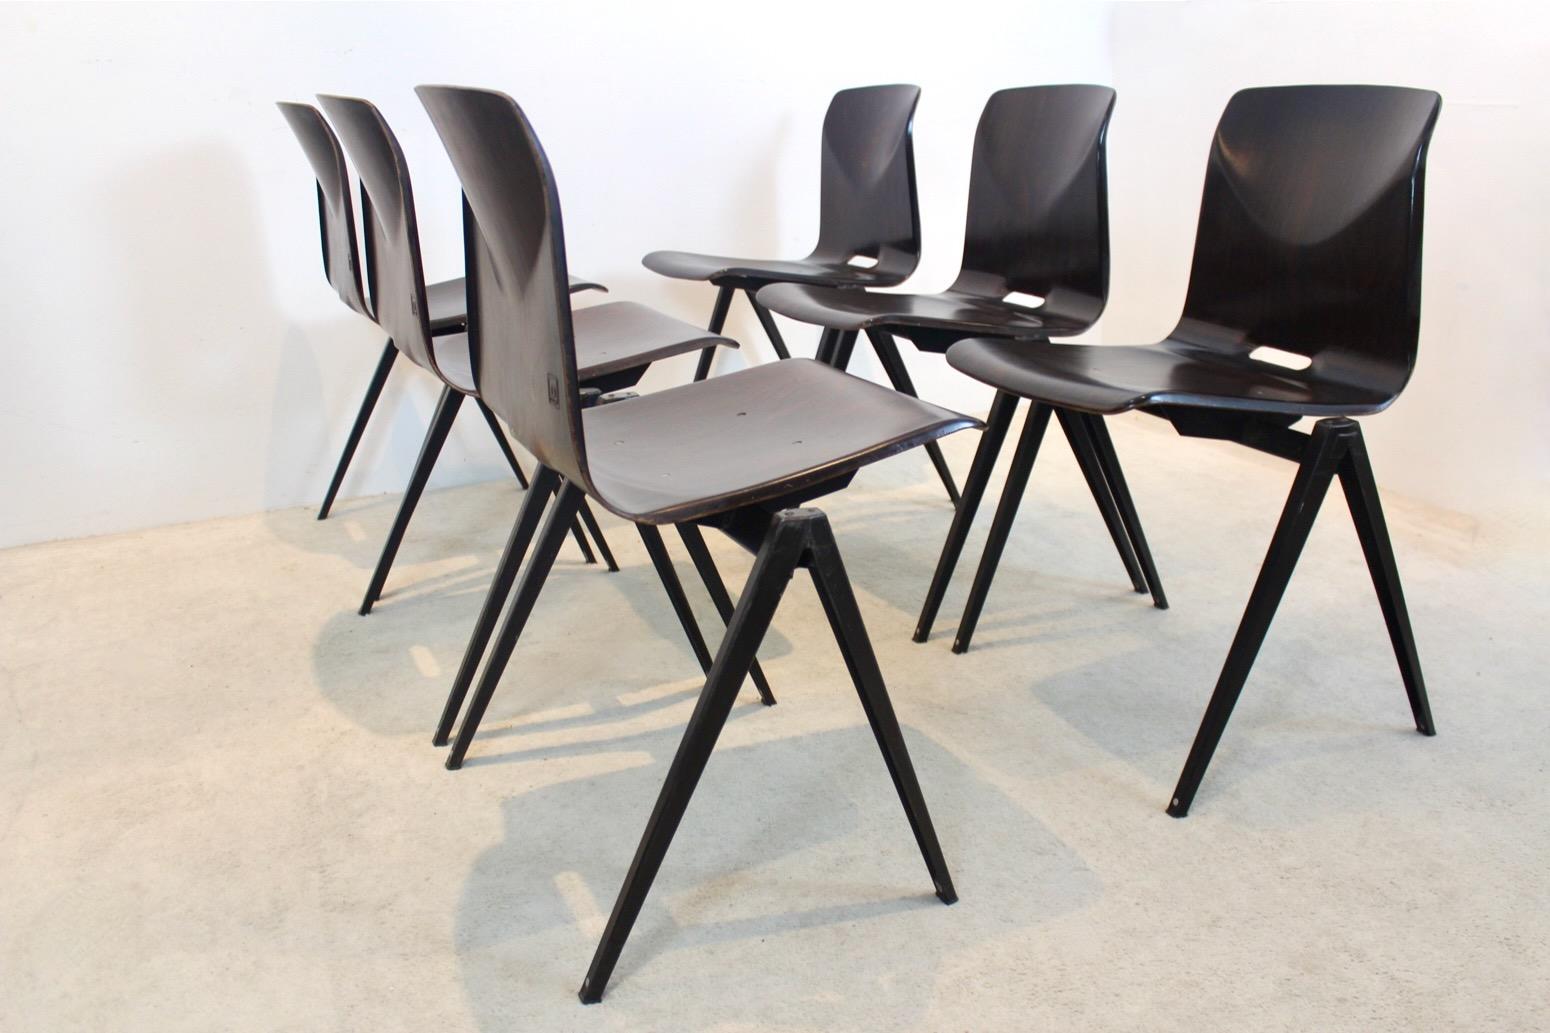 Highly wanted industrial model S22 stacking chairs by Pagholz.Galvanitas, in Wenge color with very dark brown frame. The shells have a beautiful flamed motive and wood grain structure.

Designed in the manner of famous industrial designs by Wim